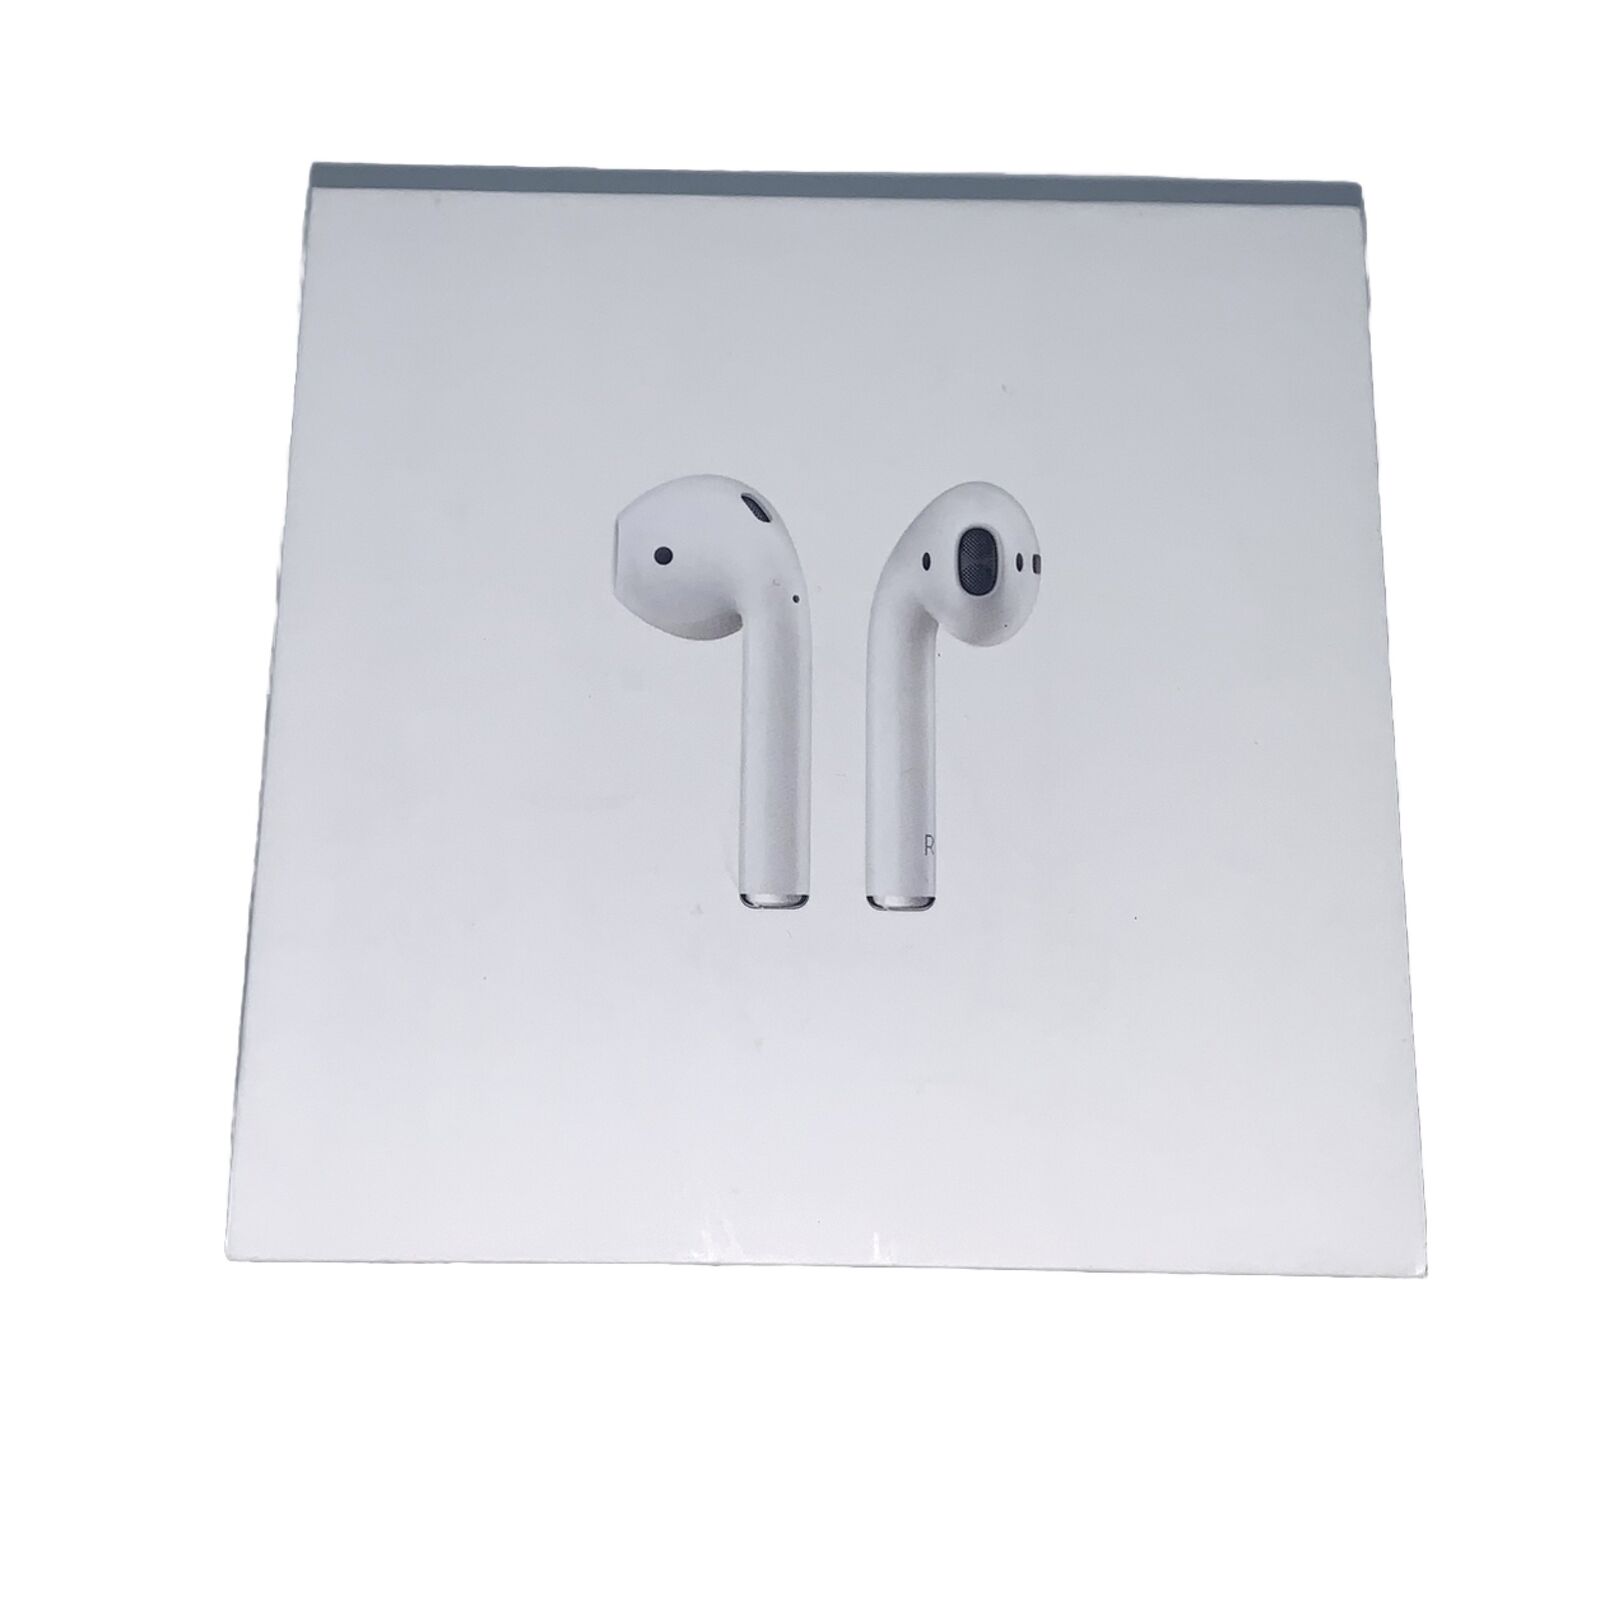 Apple AirPods 1st Generation - EMPTY BOX ONLY - Includes Info Packet